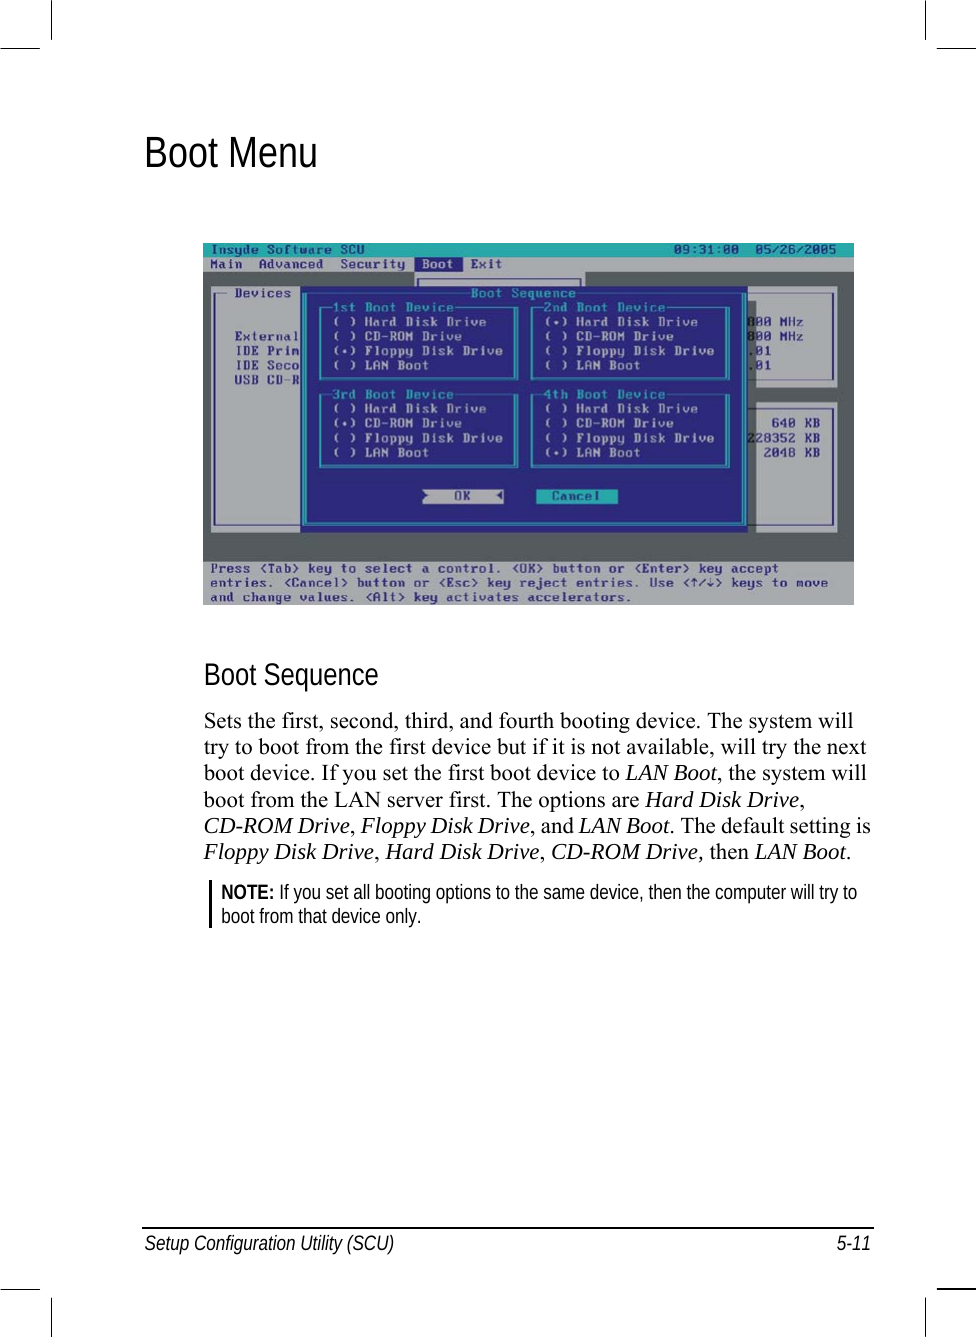  Setup Configuration Utility (SCU)  5-11 Boot Menu  Boot Sequence Sets the first, second, third, and fourth booting device. The system will try to boot from the first device but if it is not available, will try the next boot device. If you set the first boot device to LAN Boot, the system will boot from the LAN server first. The options are Hard Disk Drive, CD-ROM Drive, Floppy Disk Drive, and LAN Boot. The default setting is Floppy Disk Drive, Hard Disk Drive, CD-ROM Drive, then LAN Boot. NOTE: If you set all booting options to the same device, then the computer will try to boot from that device only.  